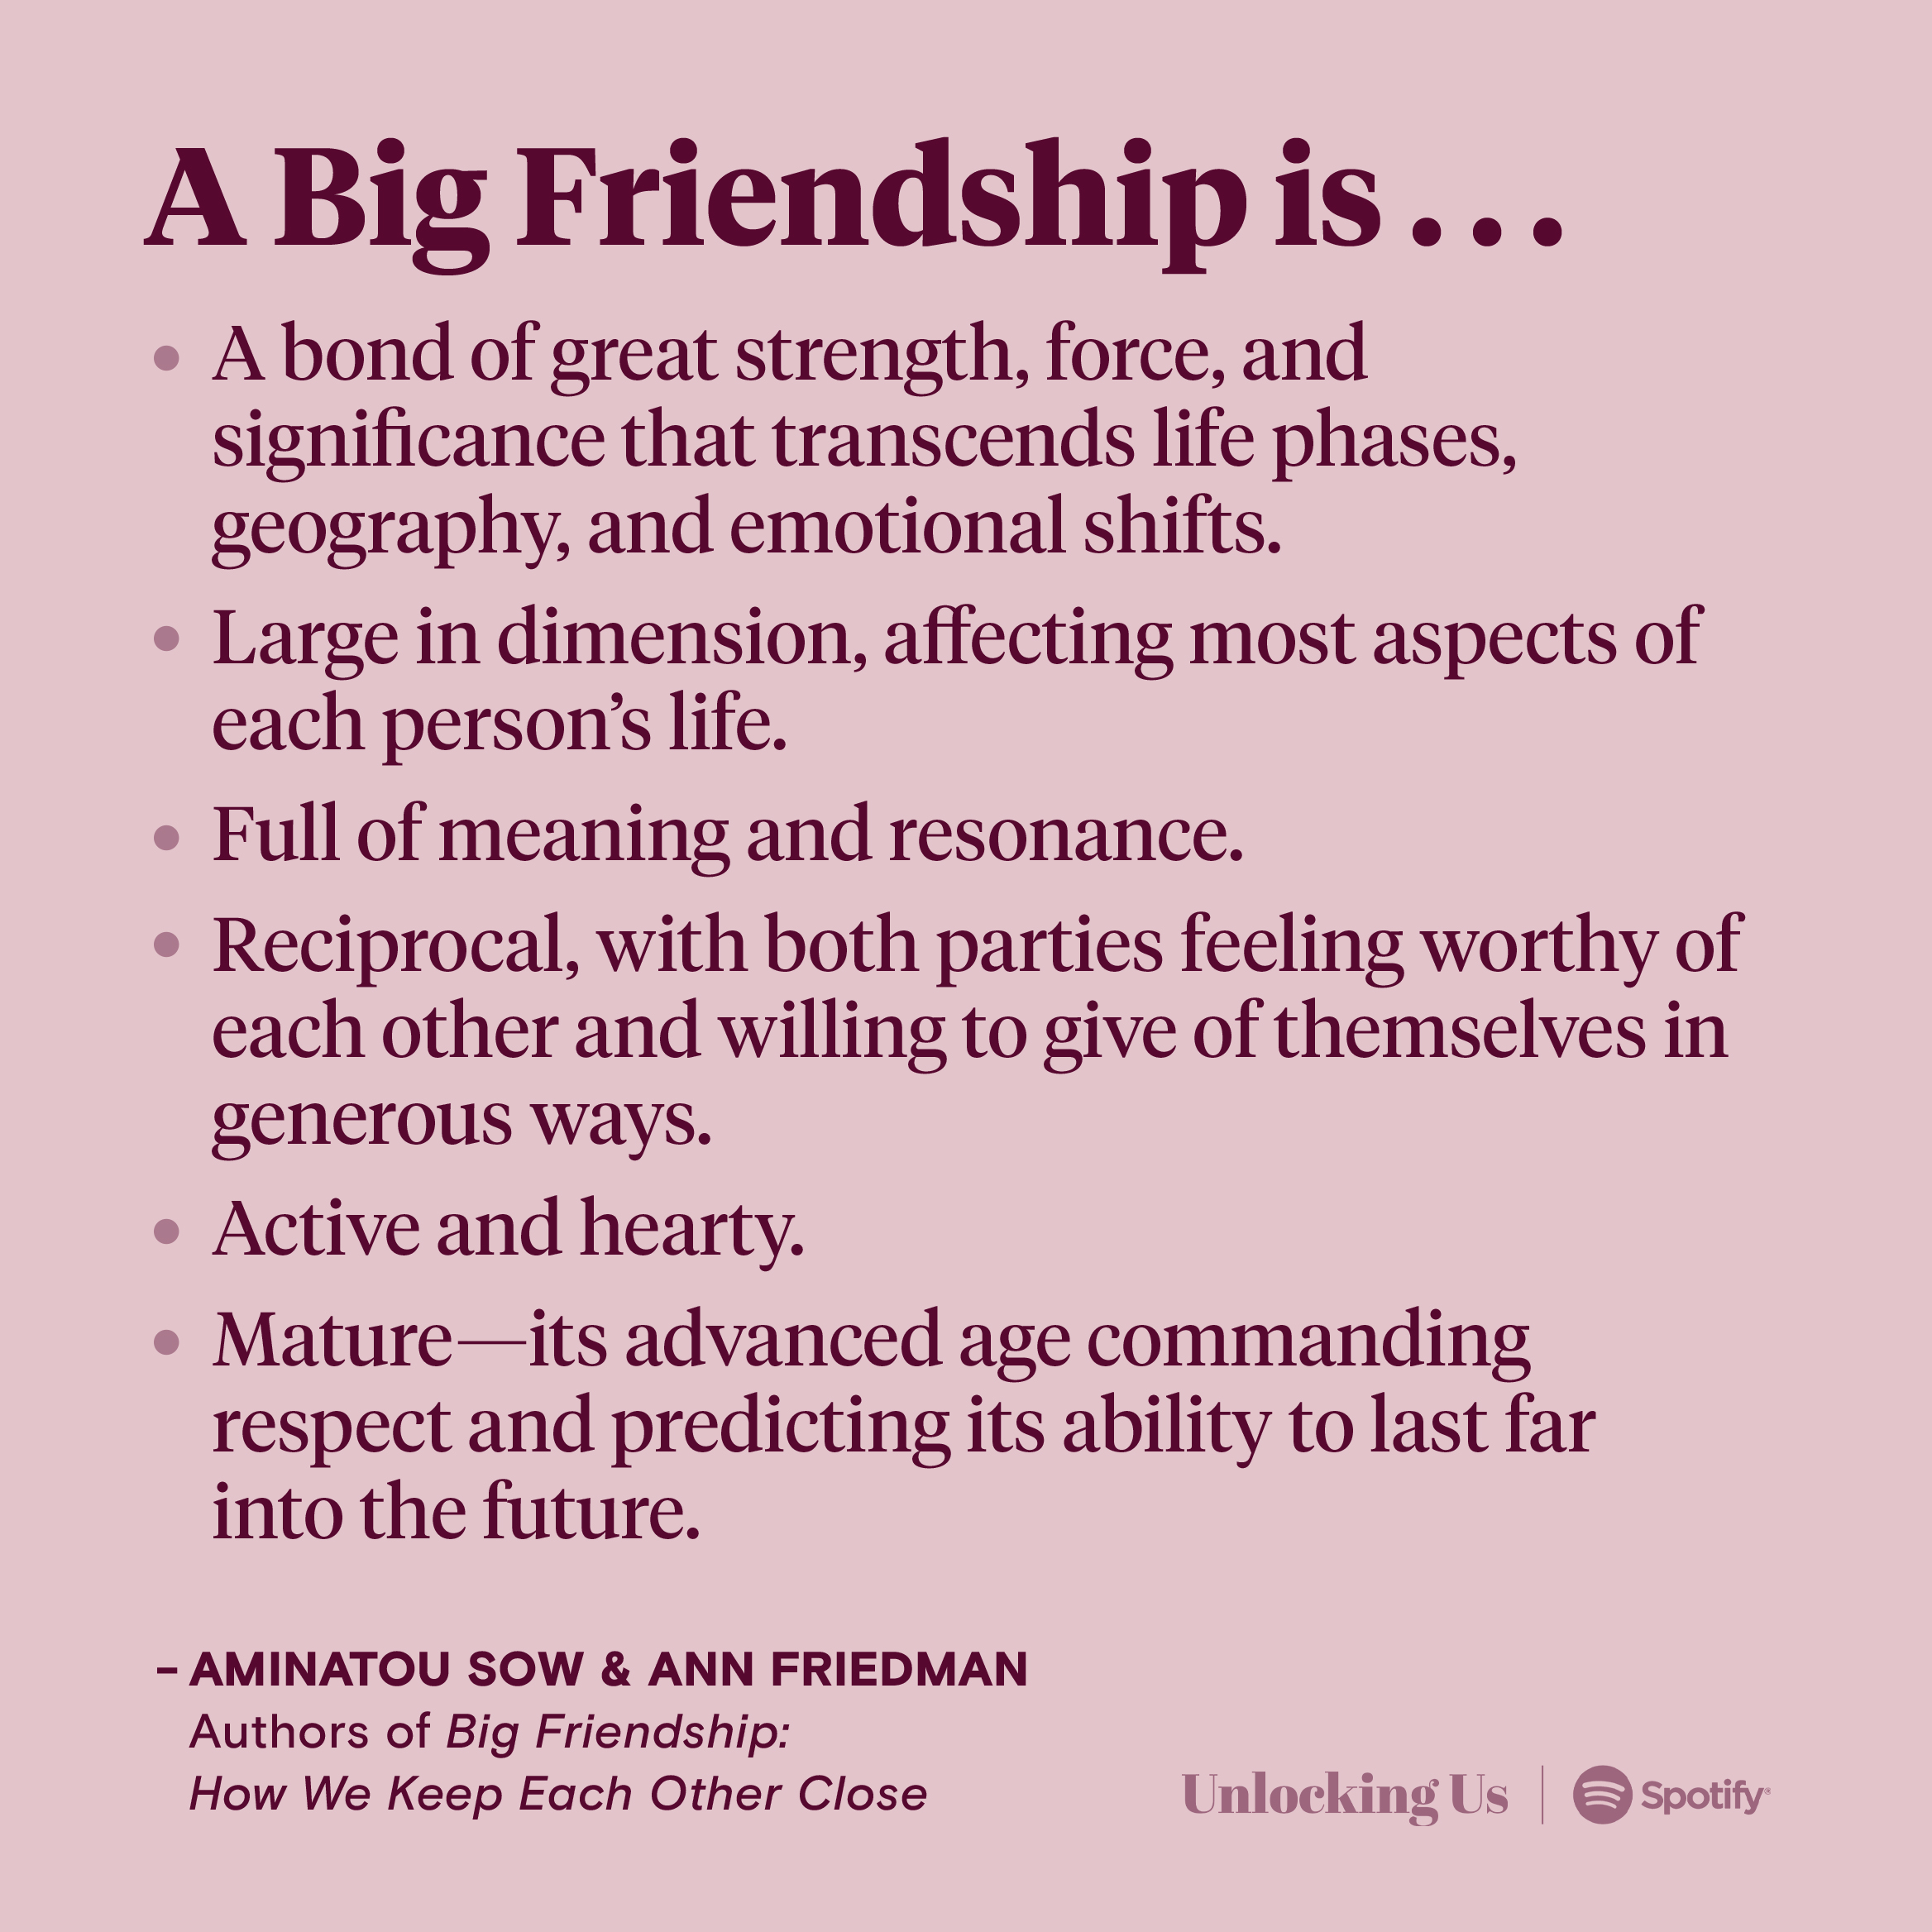 The definition of a Big Friendship from Aminatou Sow and Ann Friedman, authors of a book by the same name: A Big Friendship is a bond of great strength, force, and significance that transcends life phases, geography, and emotional shifts; large in dimension, affecting most aspects of each person’s life; full of meaning and resonance; reciprocal, with both parties feeling worthy of each other and willing to give of themselves in generous ways; active and hearty; and mature—its advanced age commanding respect and predicting its ability to last far into the future.